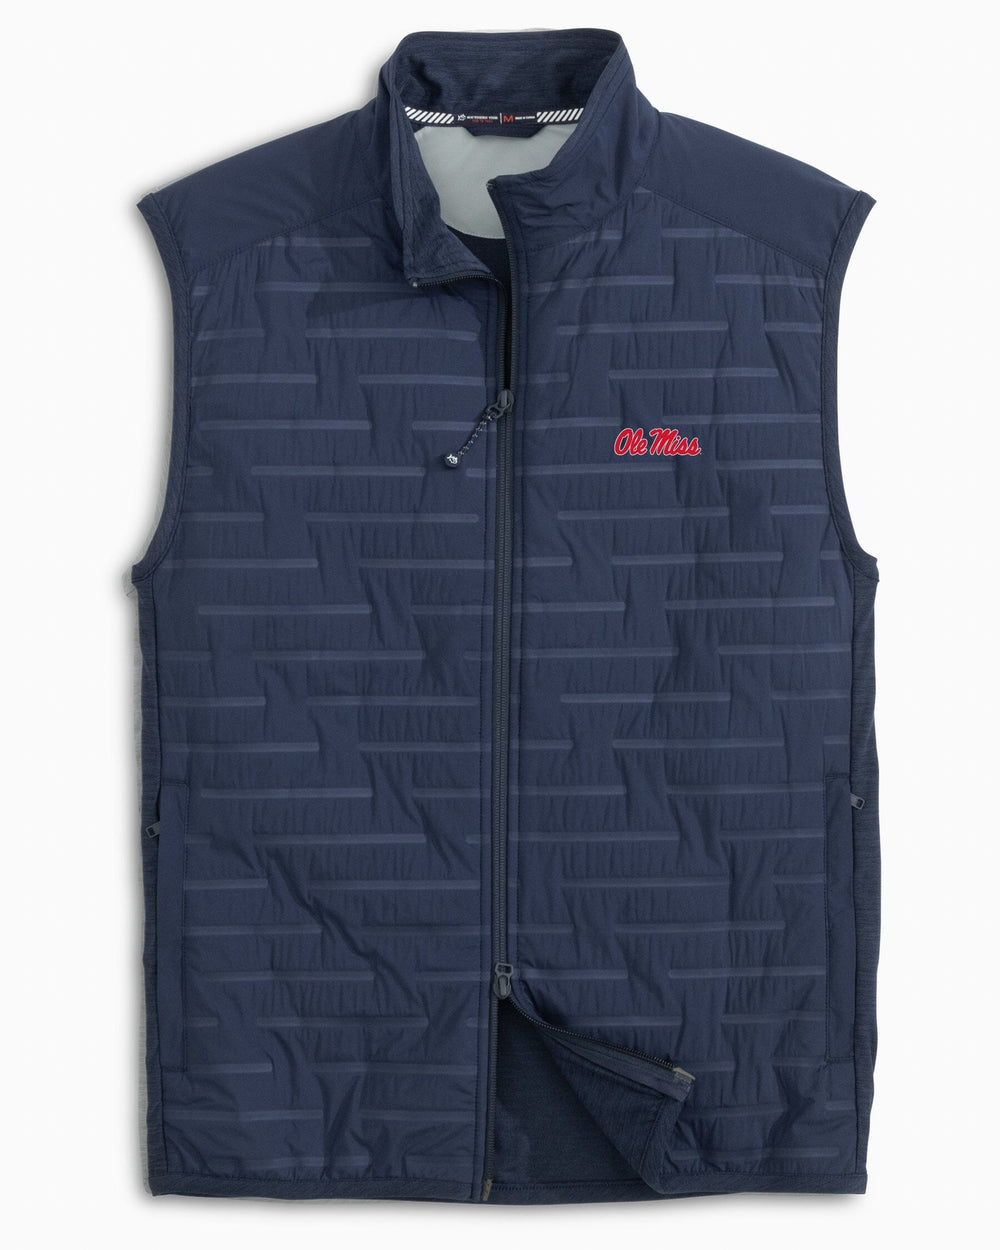 The front view of the Ole Miss Rebels Abercorn Vest by Southern Tide - True Navy